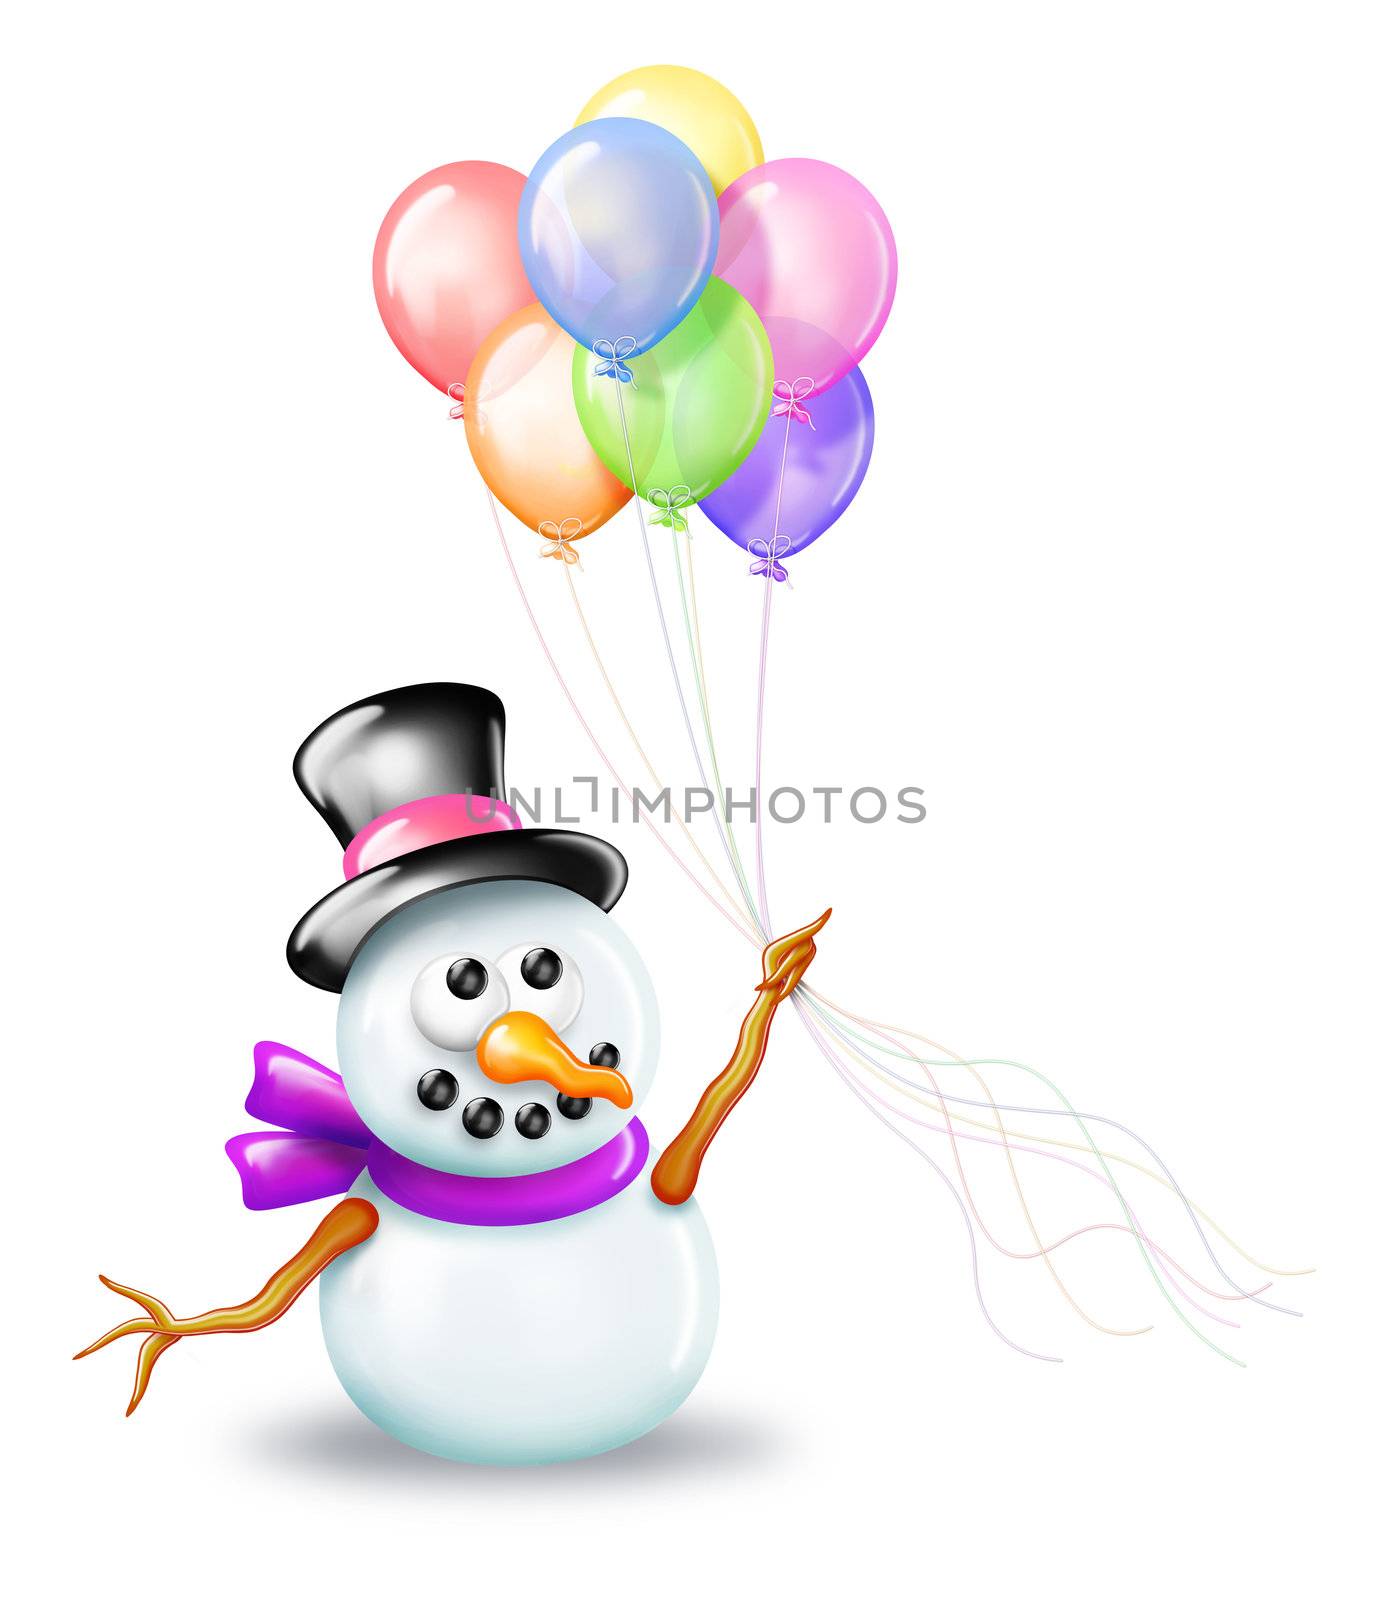 Snowman with Birthday Balloons by komodoempire